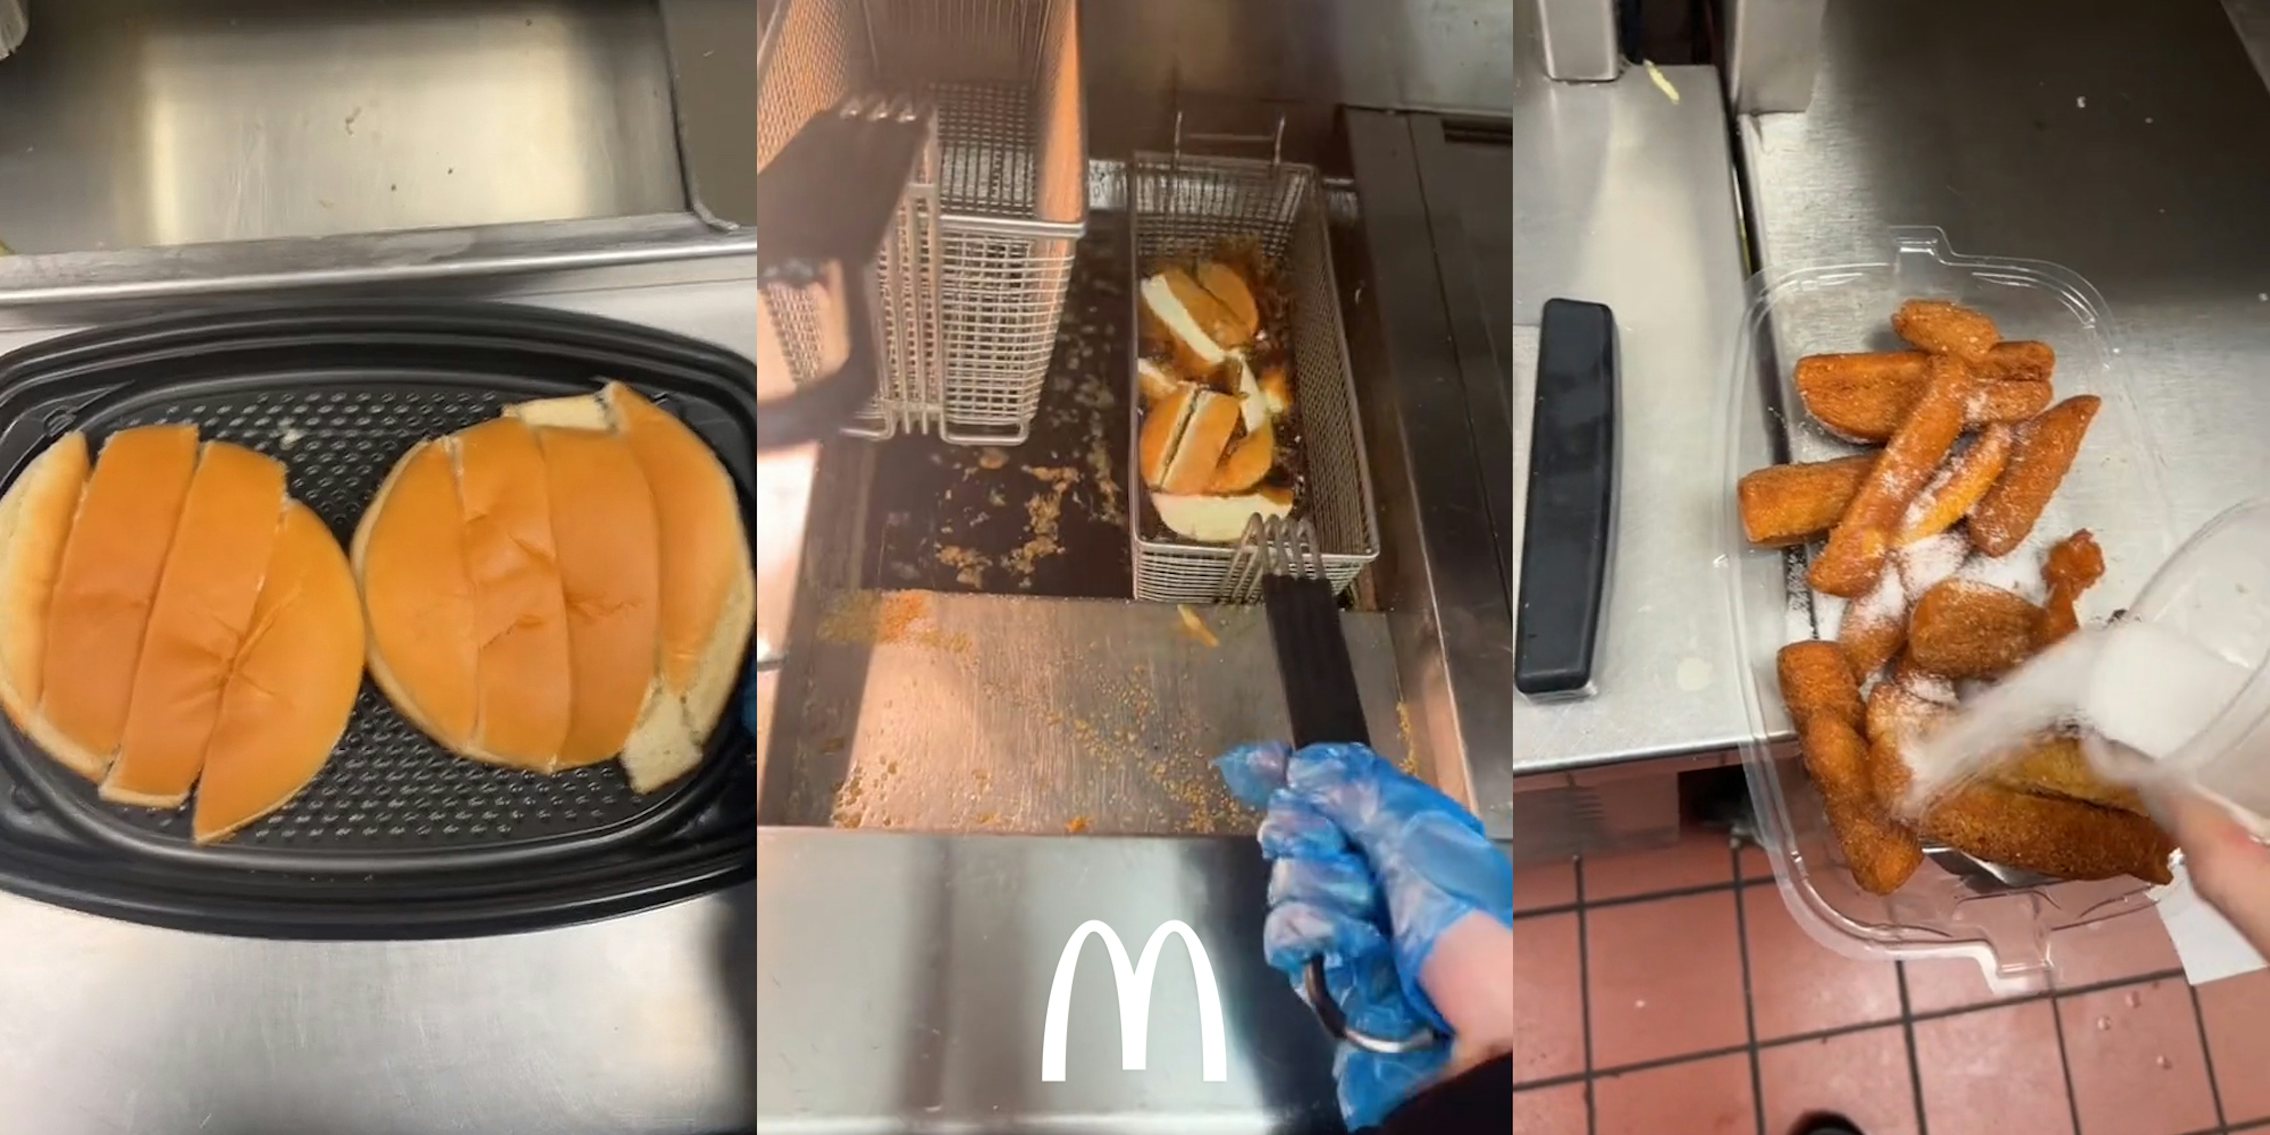 McDonald's buns cut in container (l) McDonald's employee putting cut buns into fryer with McDonald's logo at bottom (c) McDonald's employee shaking sugar on top of bun churros (r)